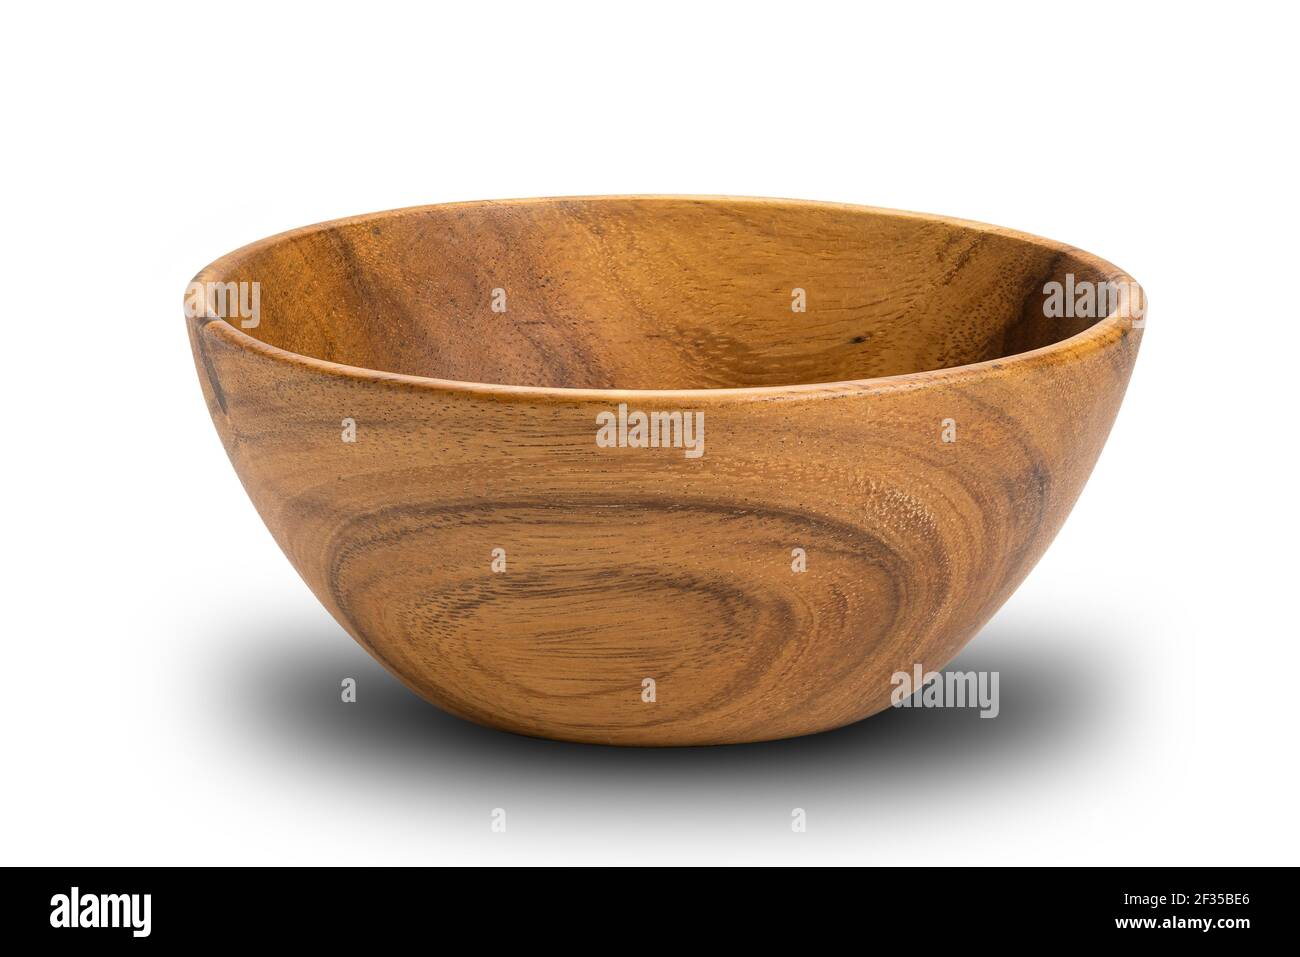 Closeup view of wooden bowl on white background with clipping path. Side view of empty wooden bowl isolated. Stock Photo